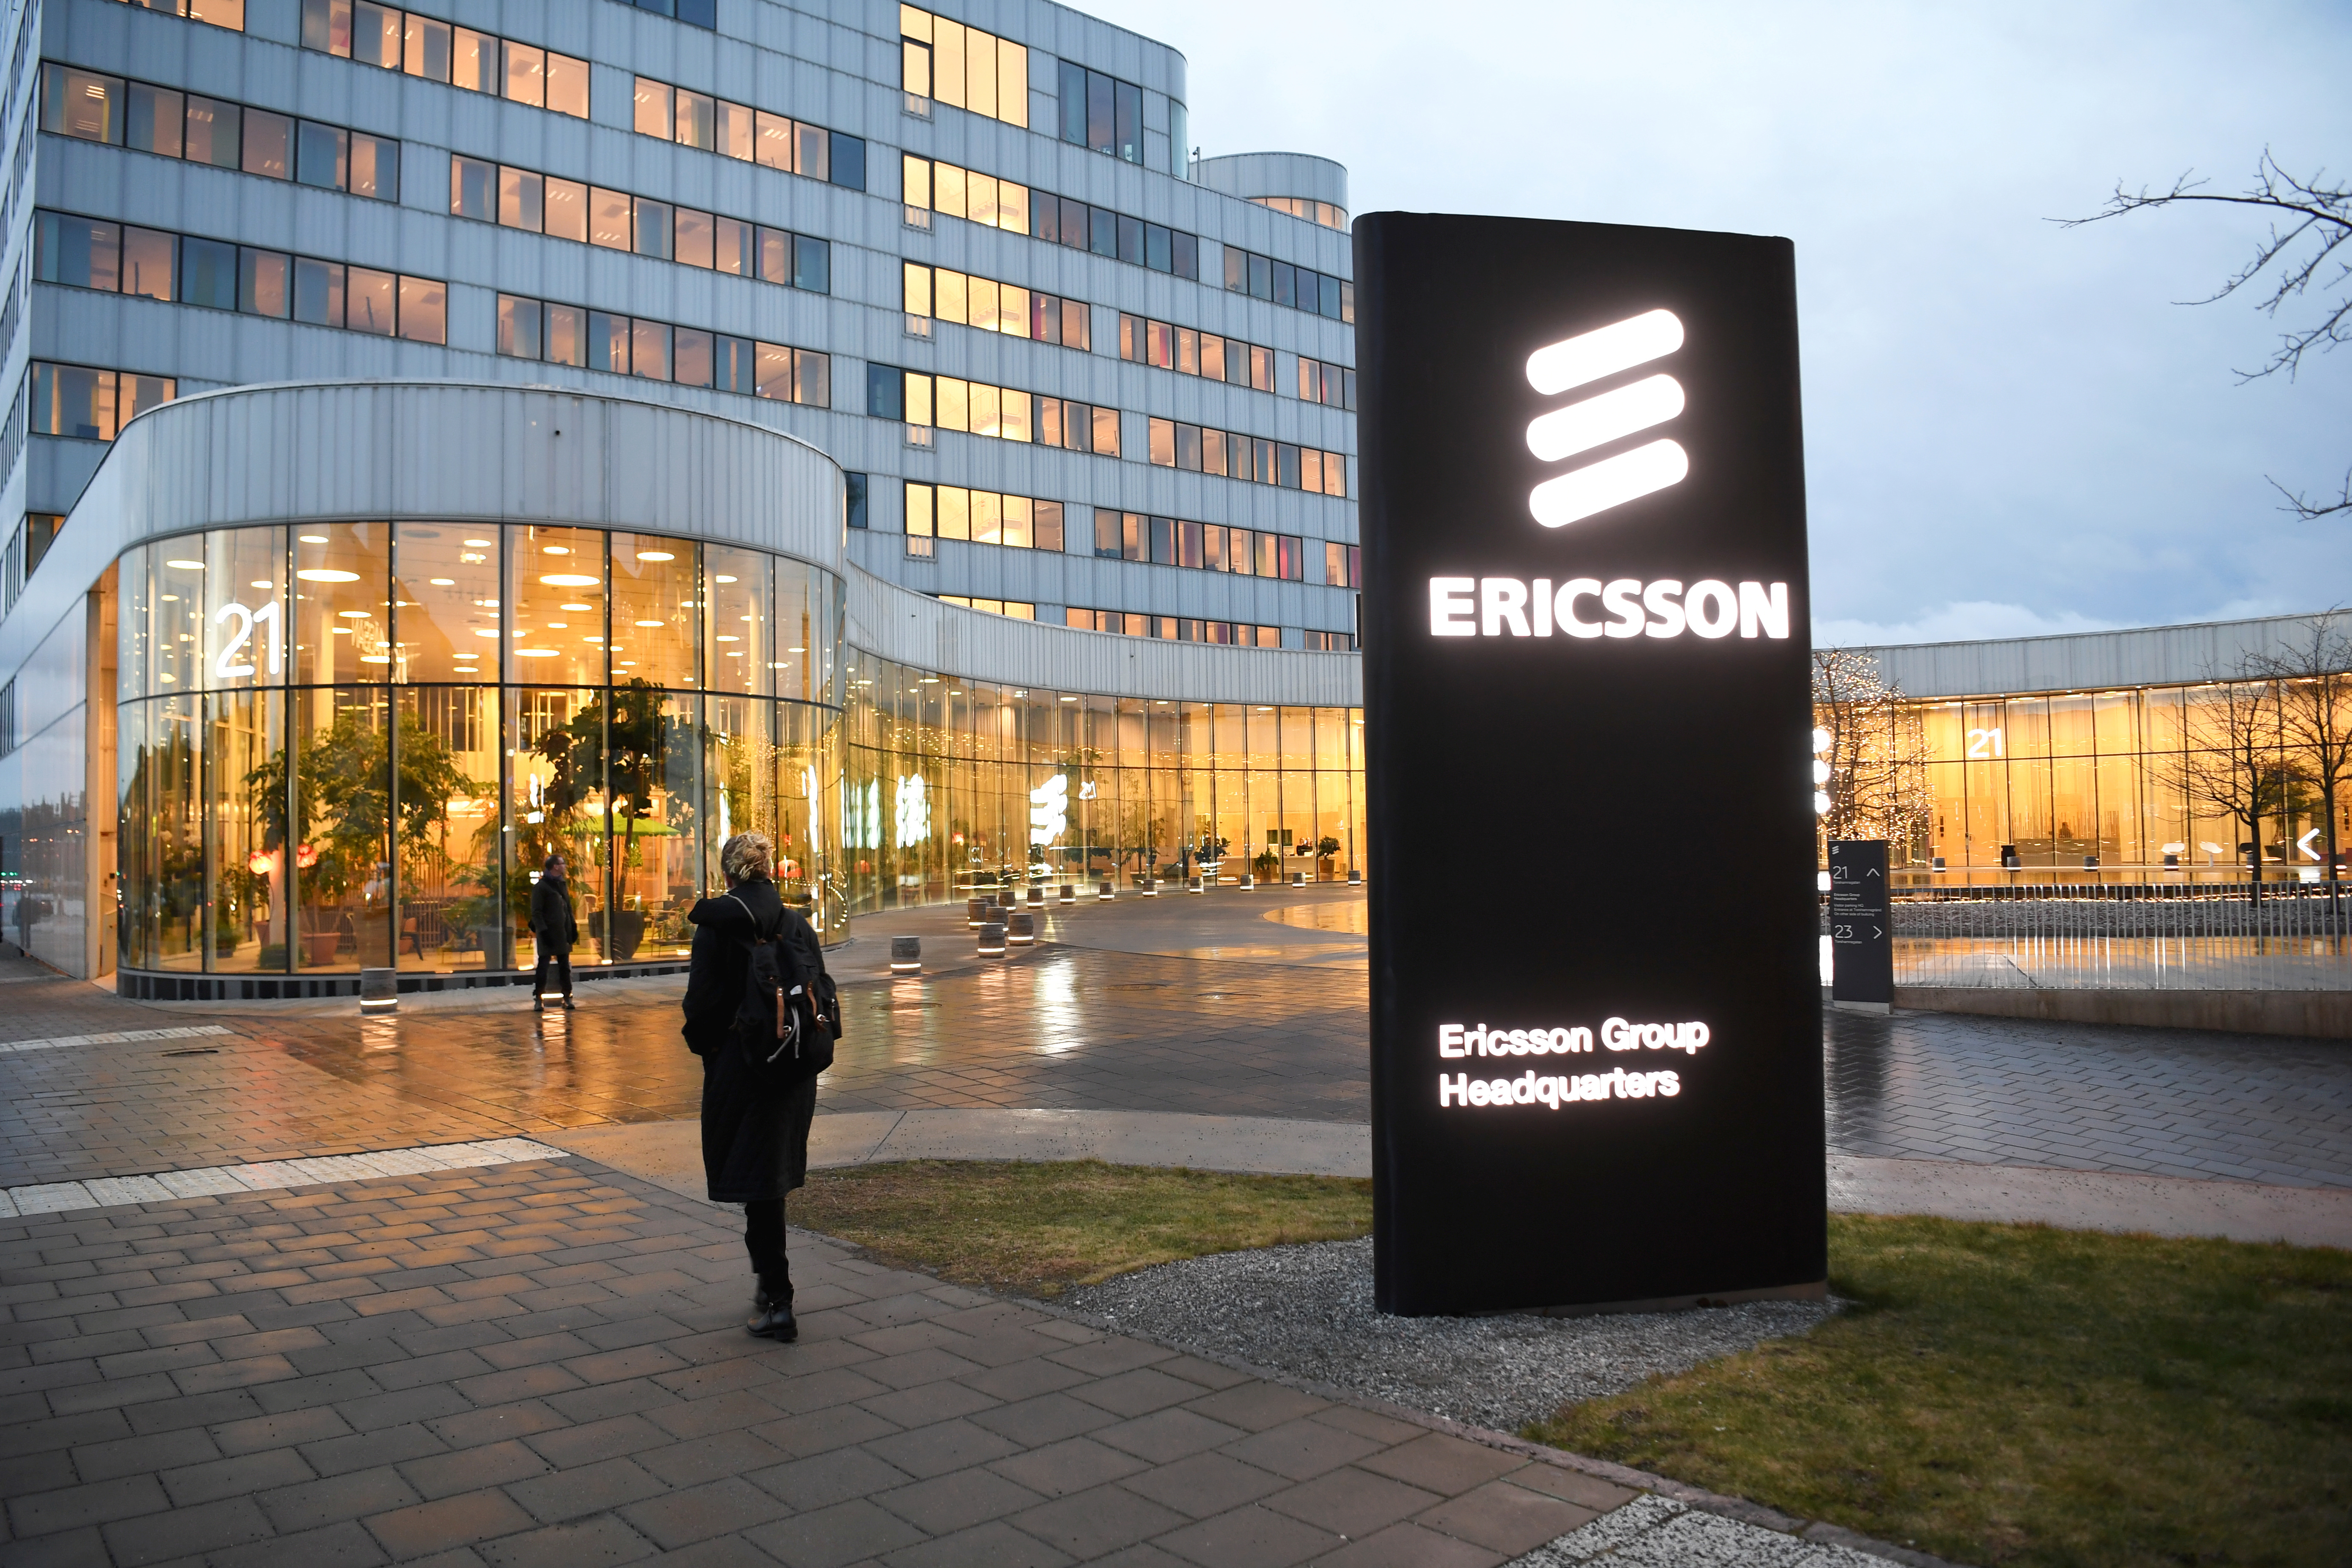 A general view of an exterior of the Ericsson headquarters in Stockholm